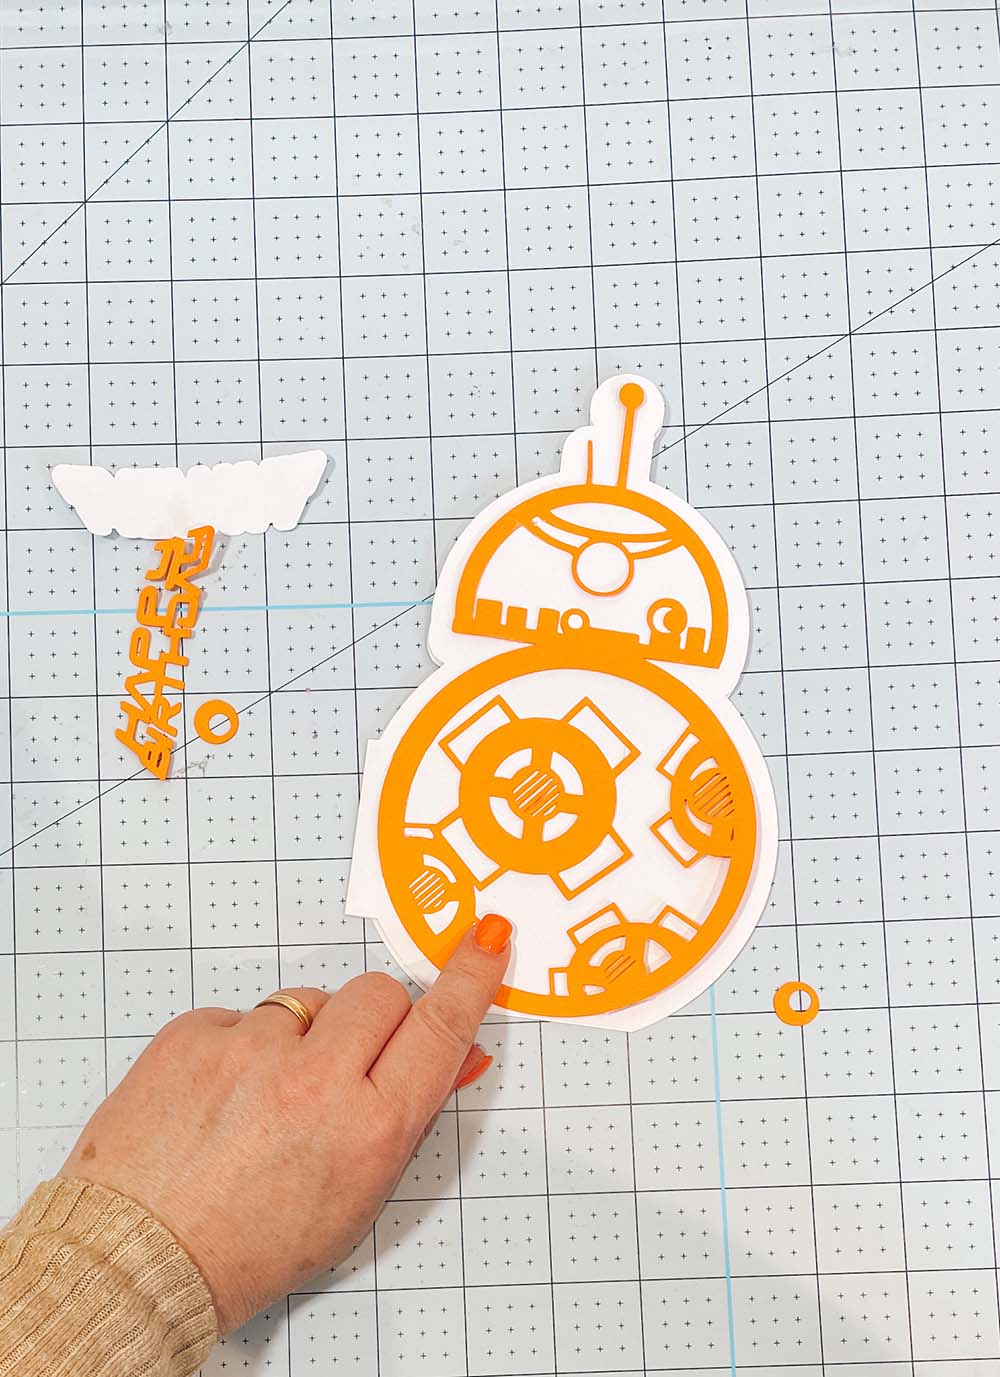 Stick your bb-8 Starwars image to the card